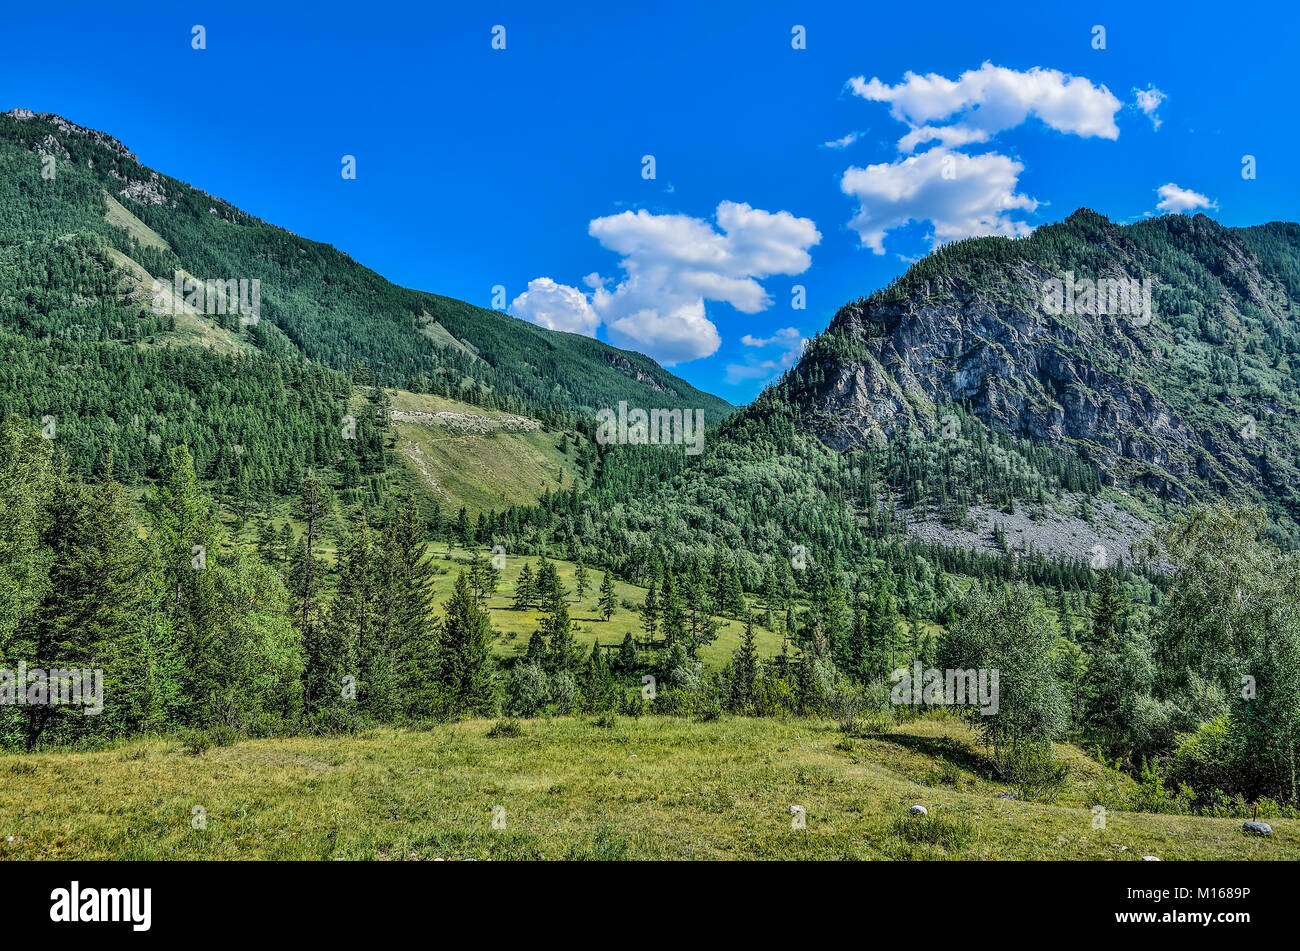 Picturesque summer mountain landscape at sunny day, mountain valley among slopes of mountains with coniferous forest covered, Altai mountains, Siberia Stock Photo